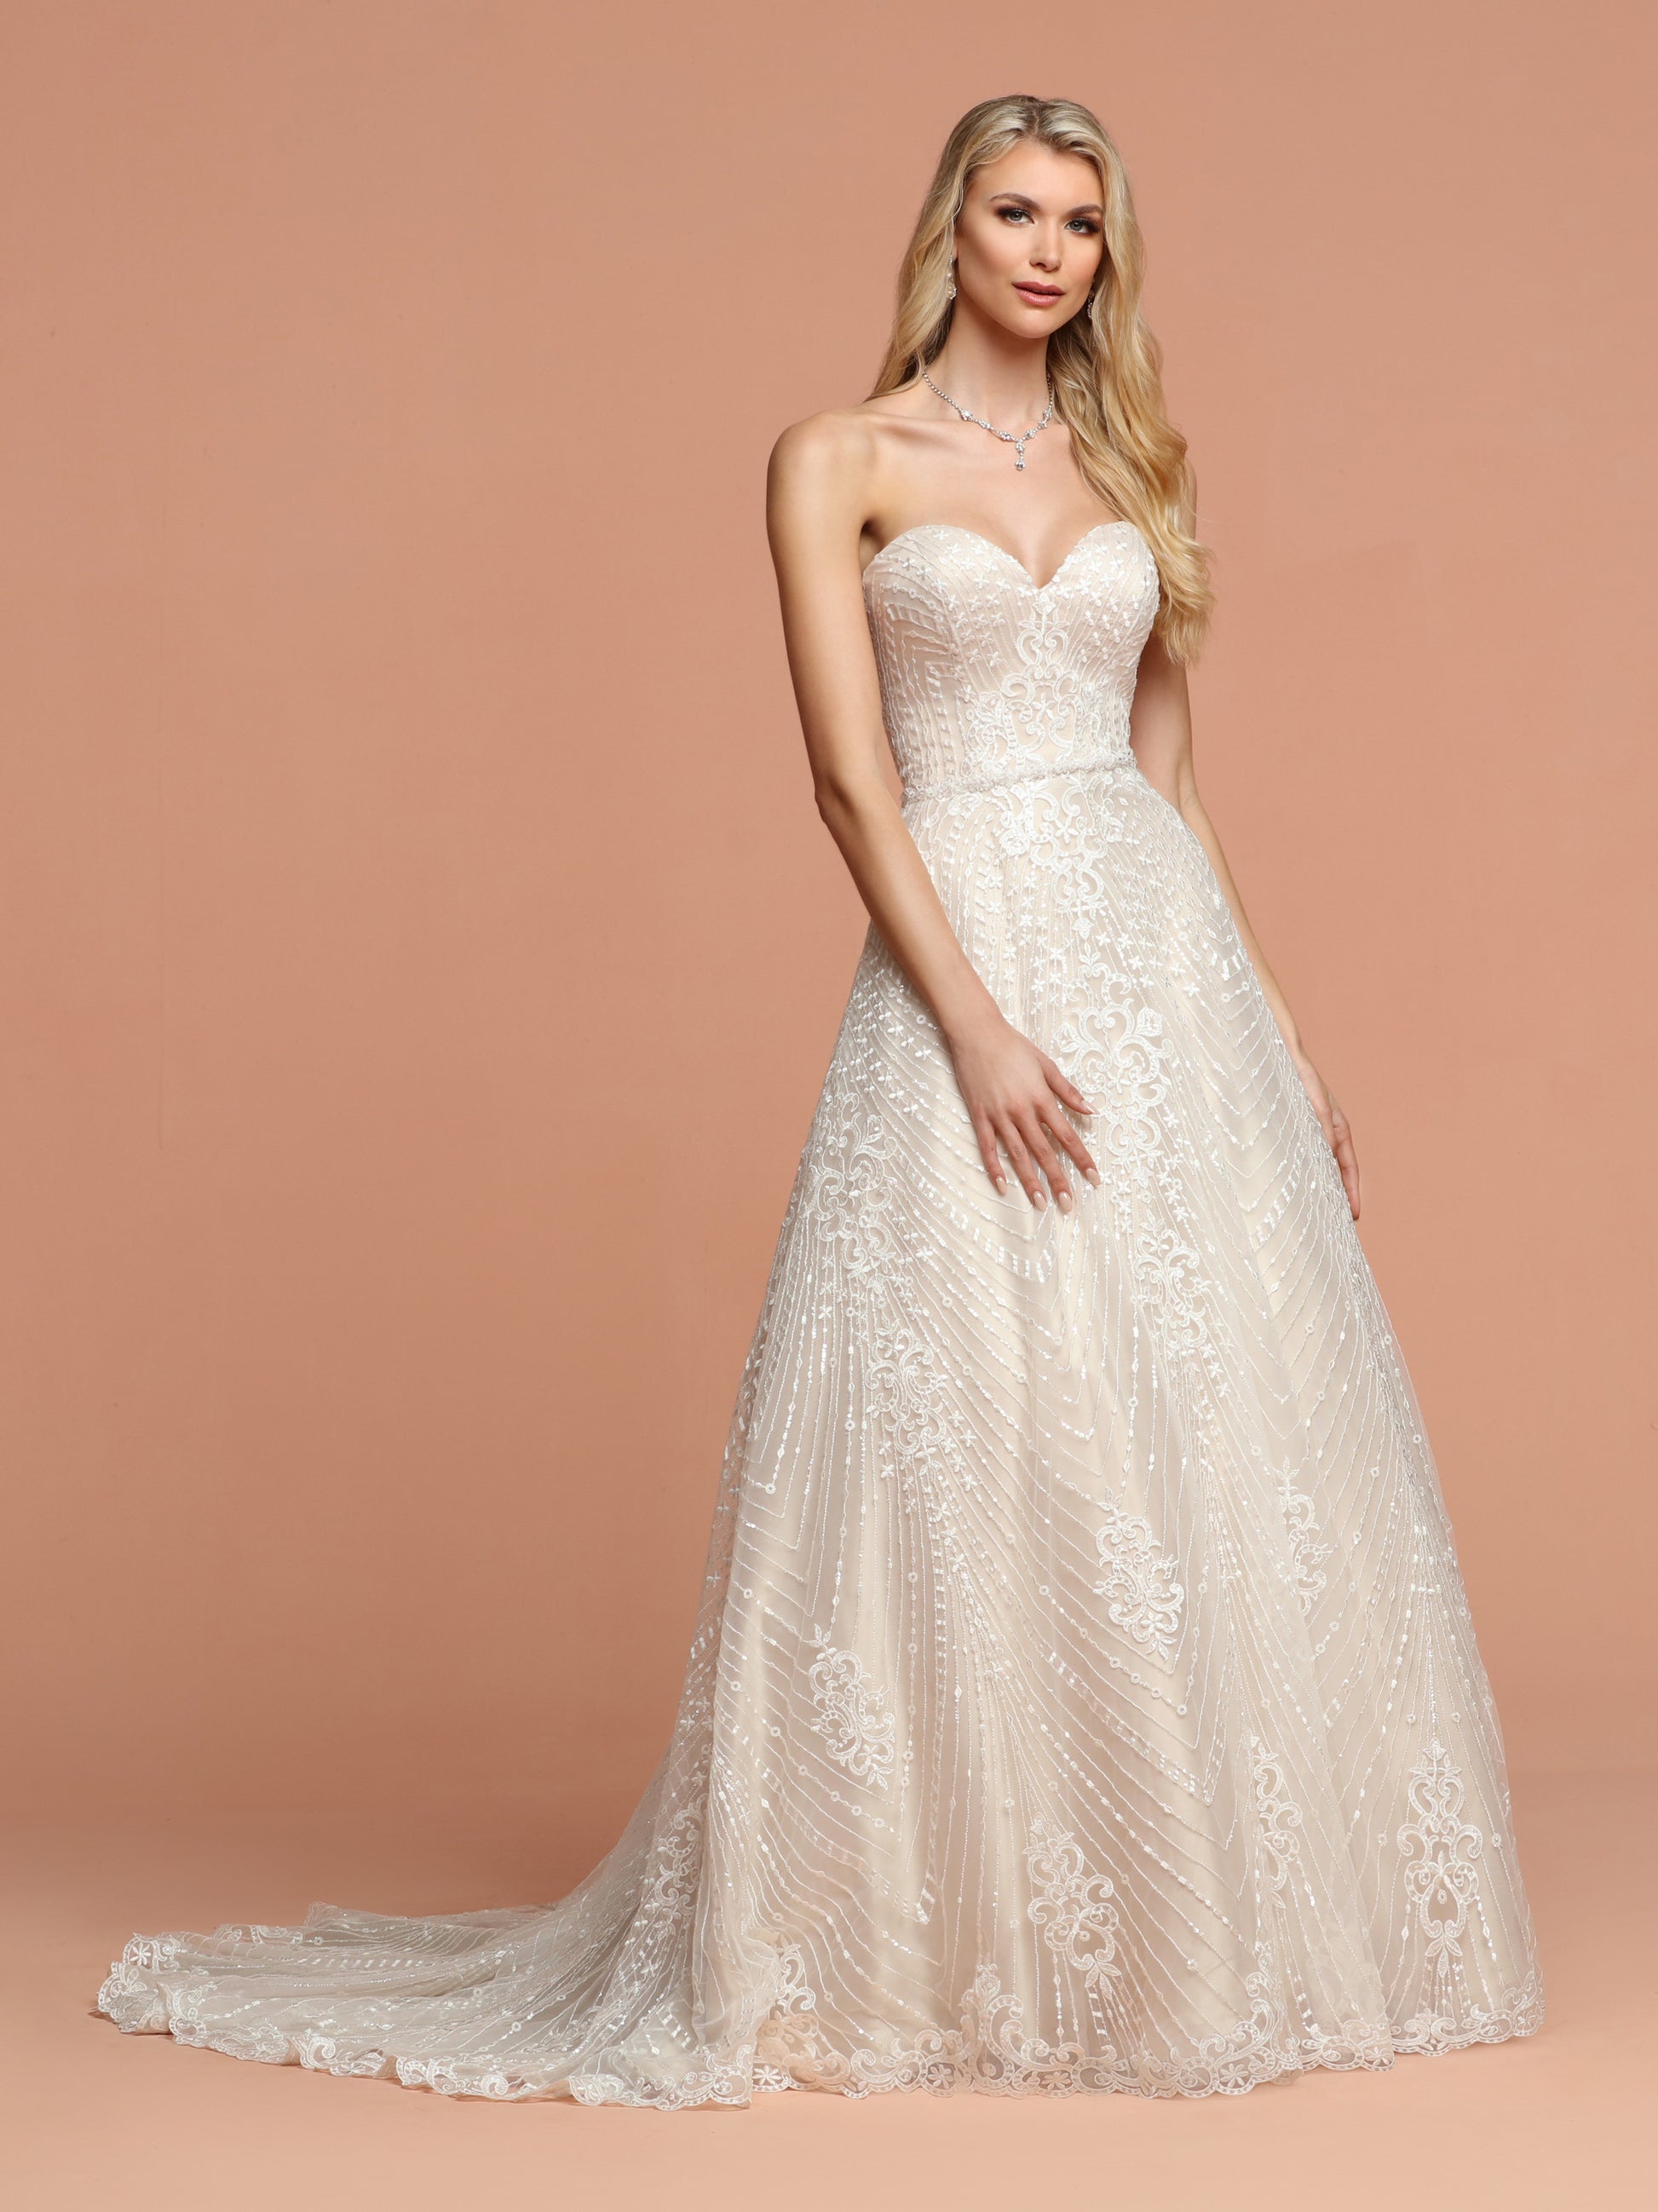 Davinci Bridal 50593 is a Long All over Lace Ballgown Wedding Dress. Featuring a sweetheart strapless neckline and a beautiful train. Corset Back. Embellished Crystal waist belt.  Available for 1-2 Week Delivery!!!  Available Sizes: 2,4,6,8,10,12,14,16,18,20  Available Colors: Ivory/Nude, Ivory/Ivory